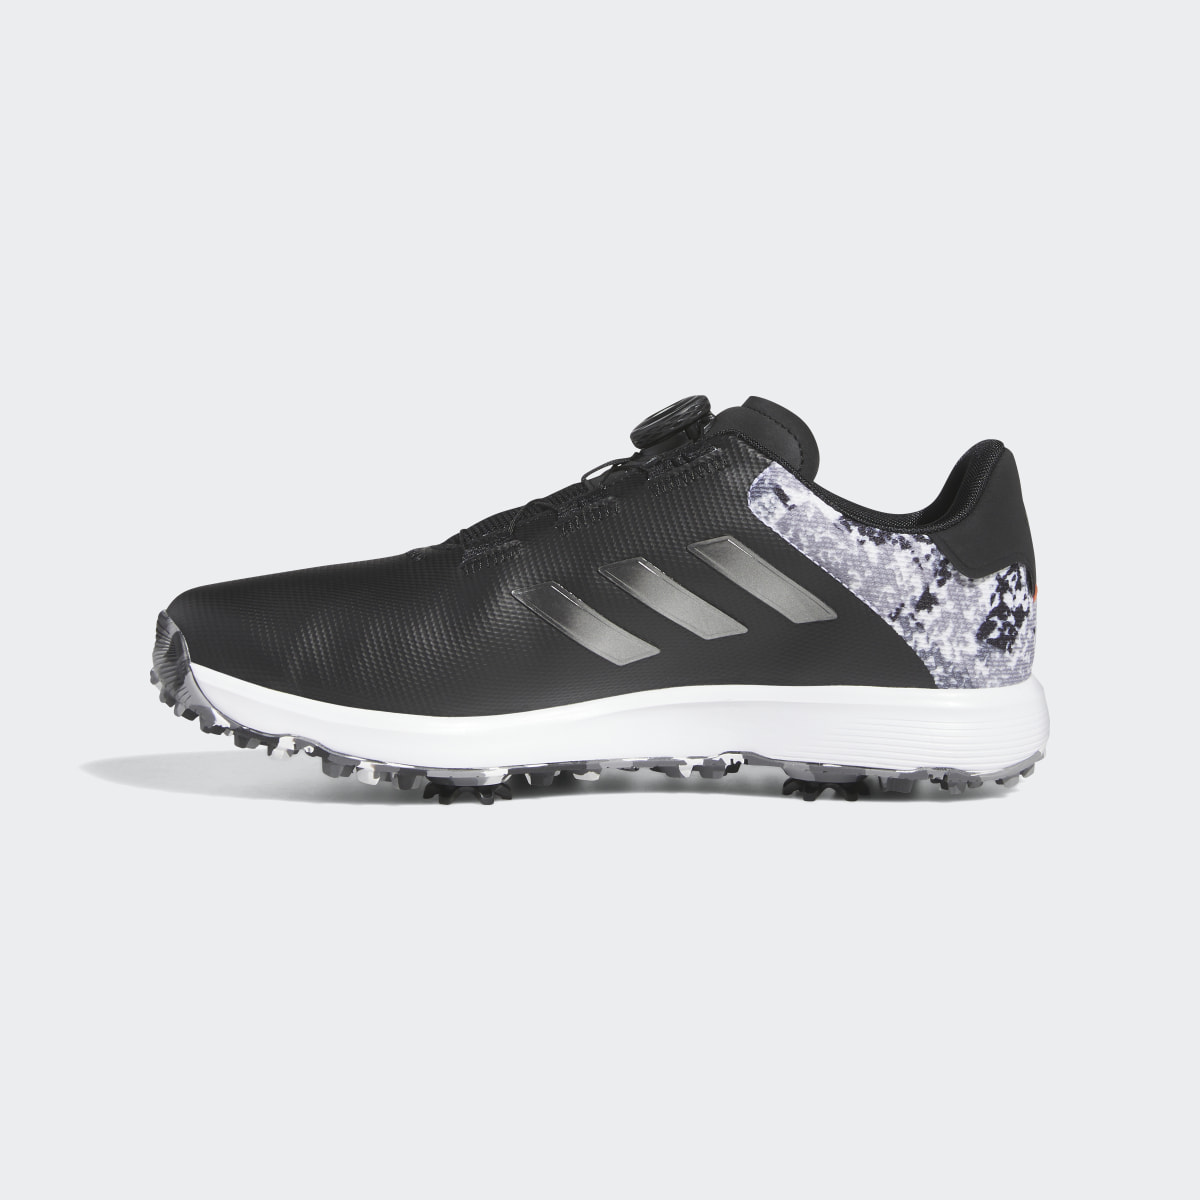 Adidas S2G BOA Wide Golf Shoes. 7